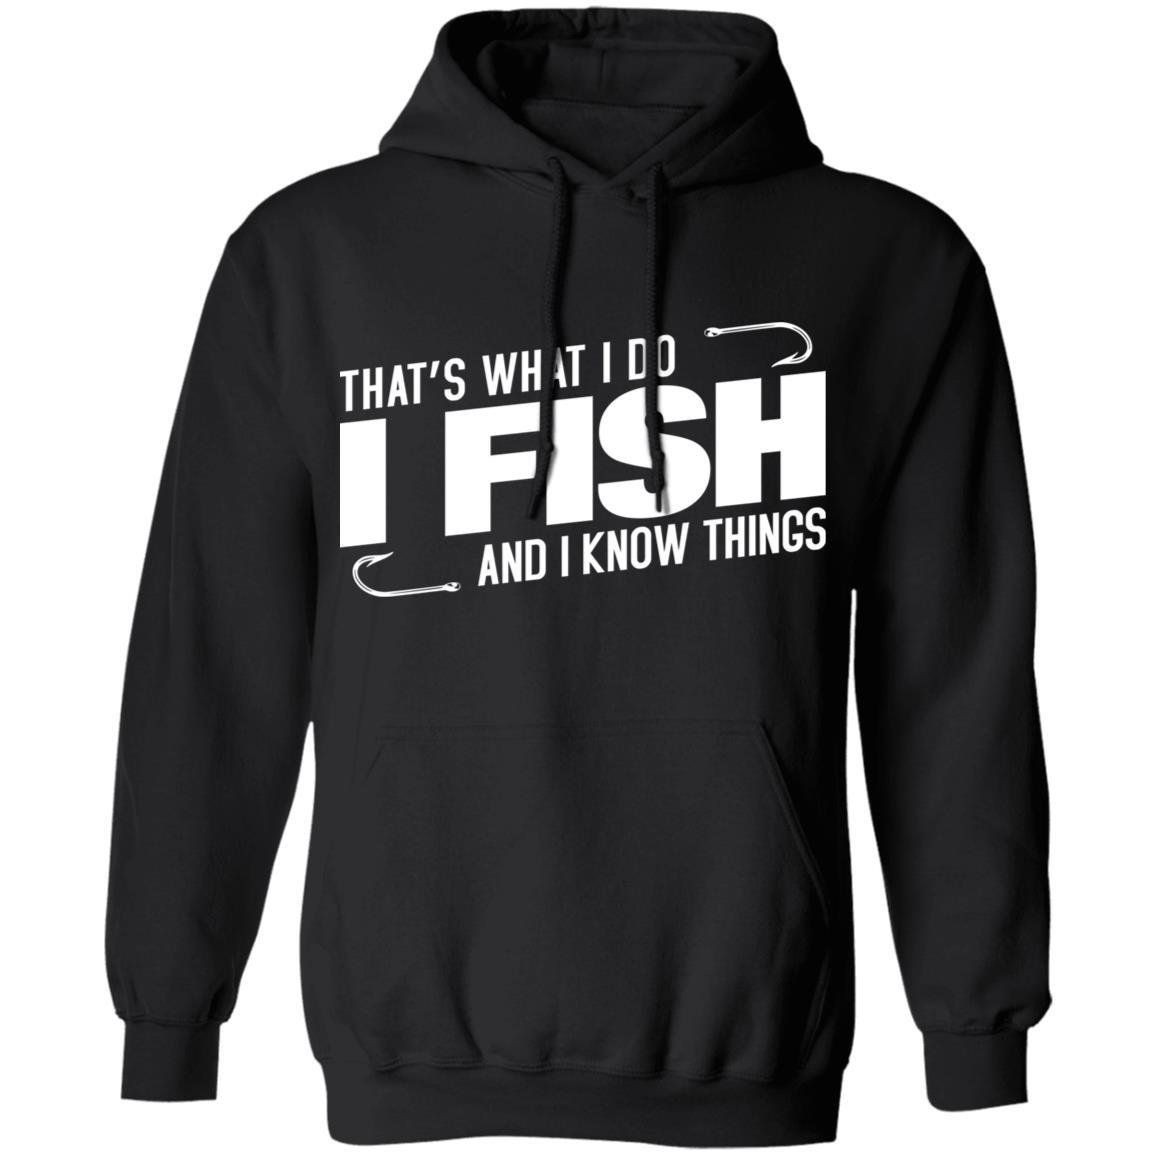 That's what i do i fish and i know things hoodie i black